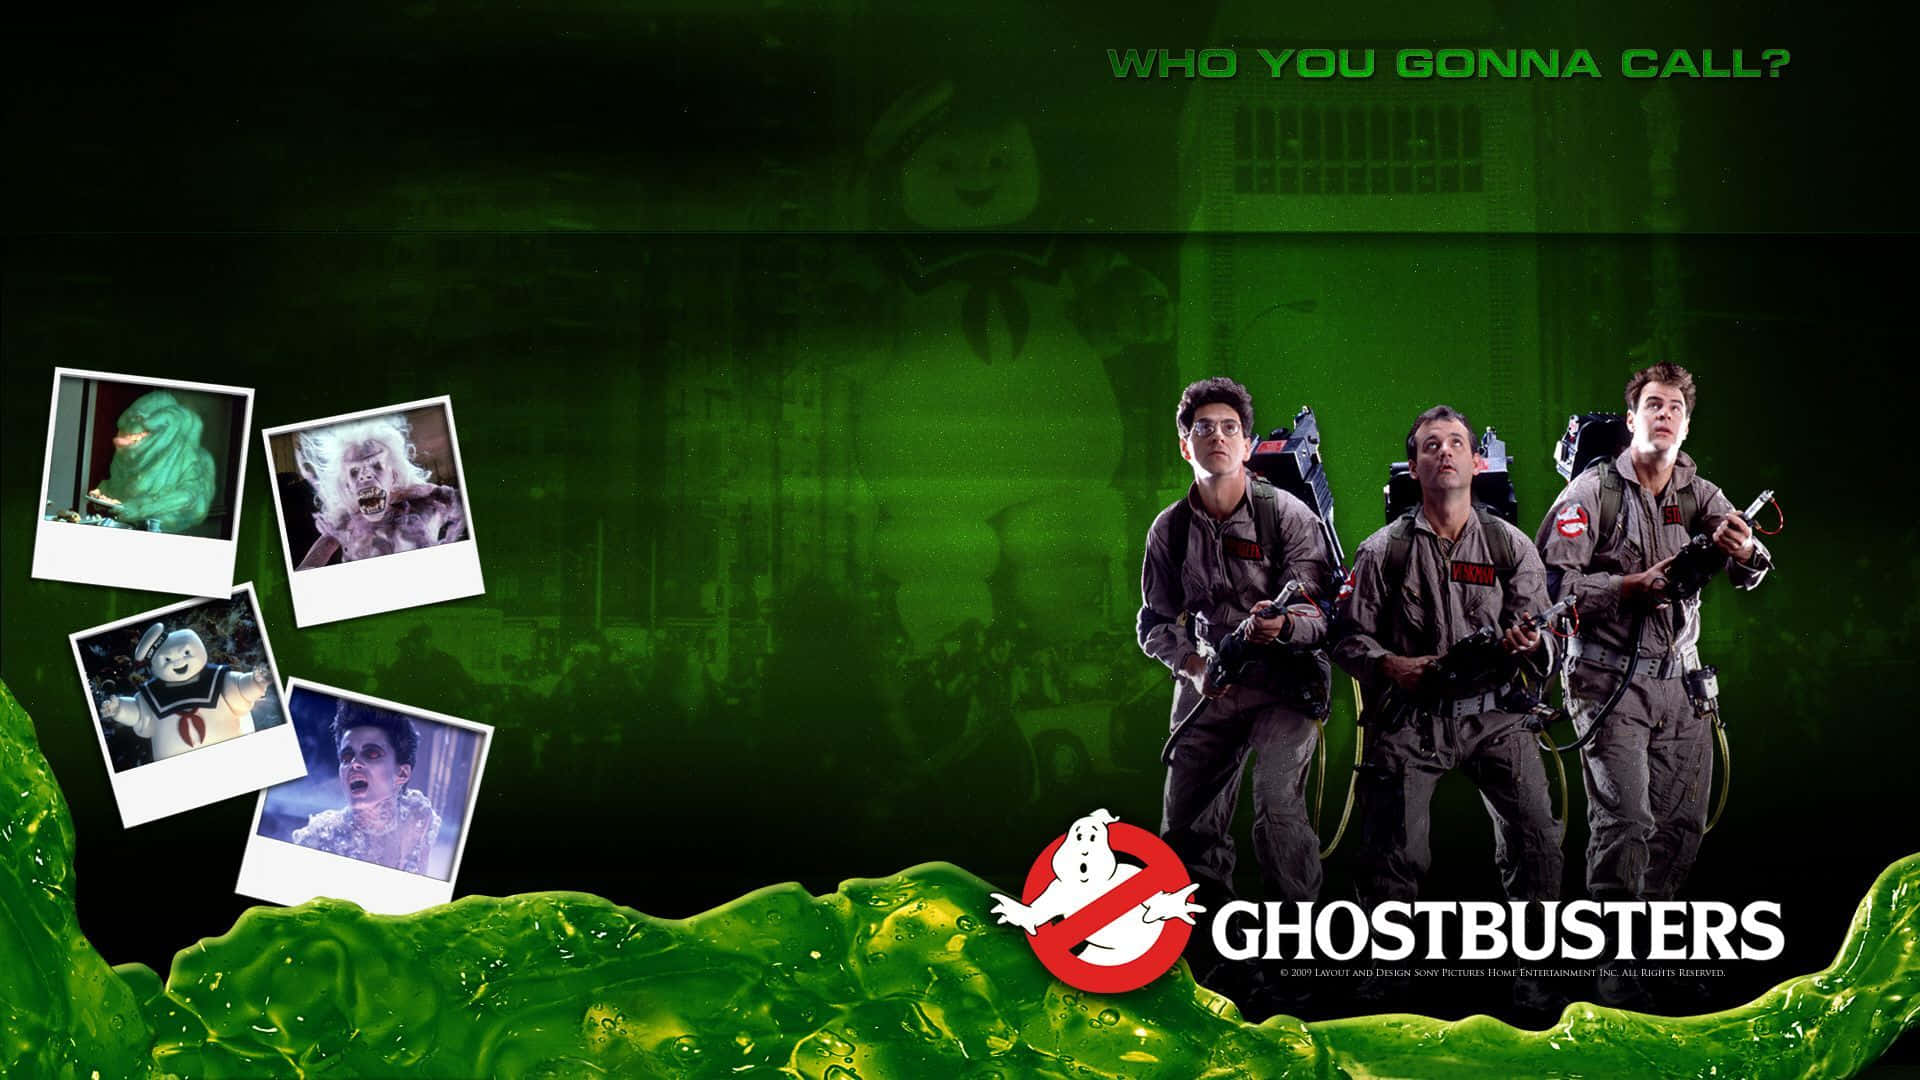 Join the Ghostbusters team as they fight off pesky ghosts!